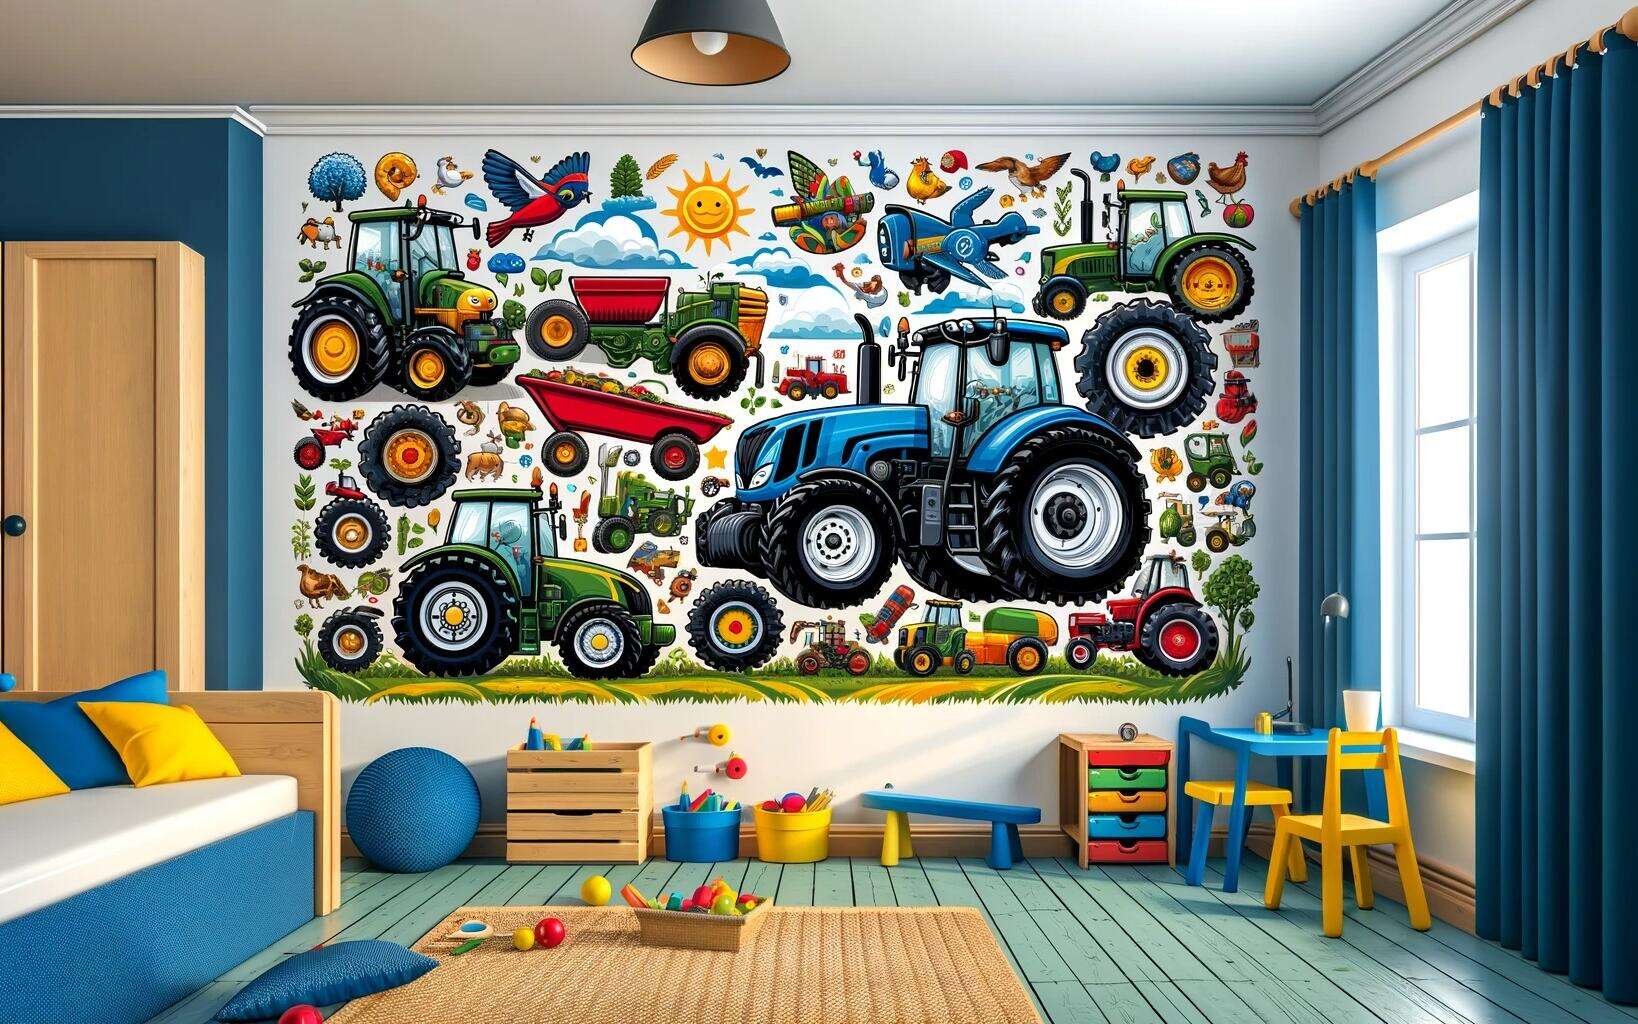 Adding Fun to the Farm: Tractor Stickers and Wall Decals